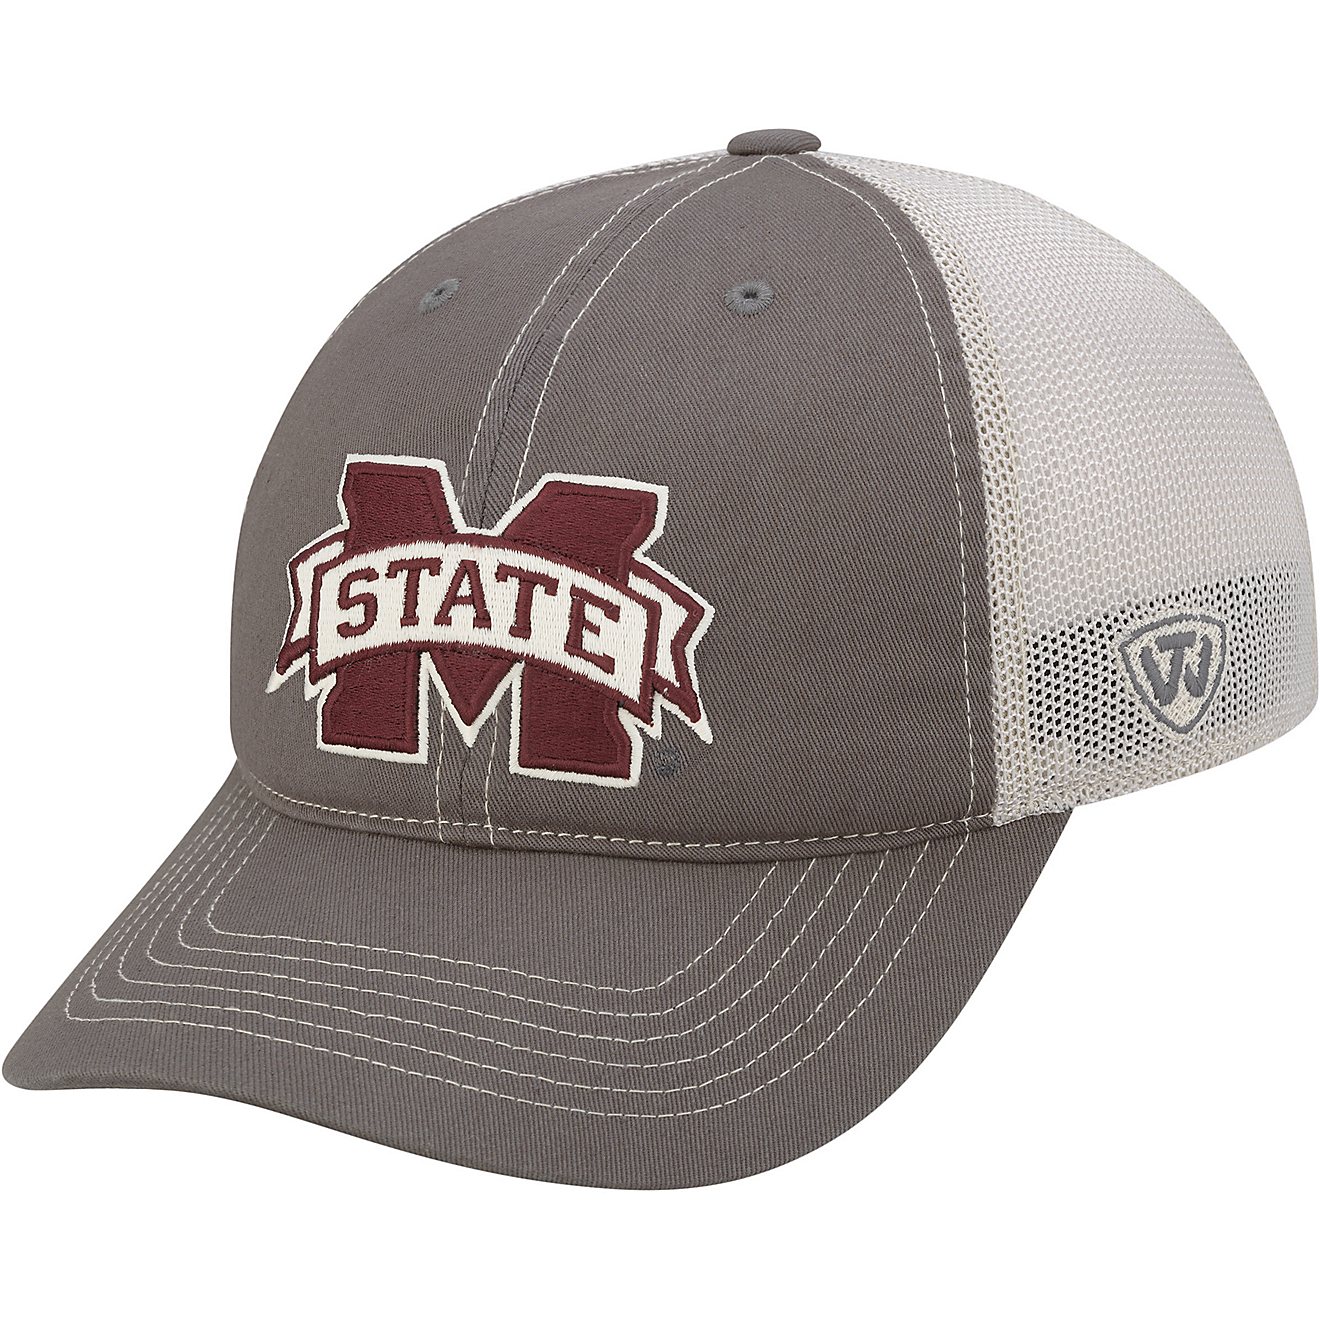 Top of the World Adults' Mississippi State University Putty Cap                                                                  - view number 1